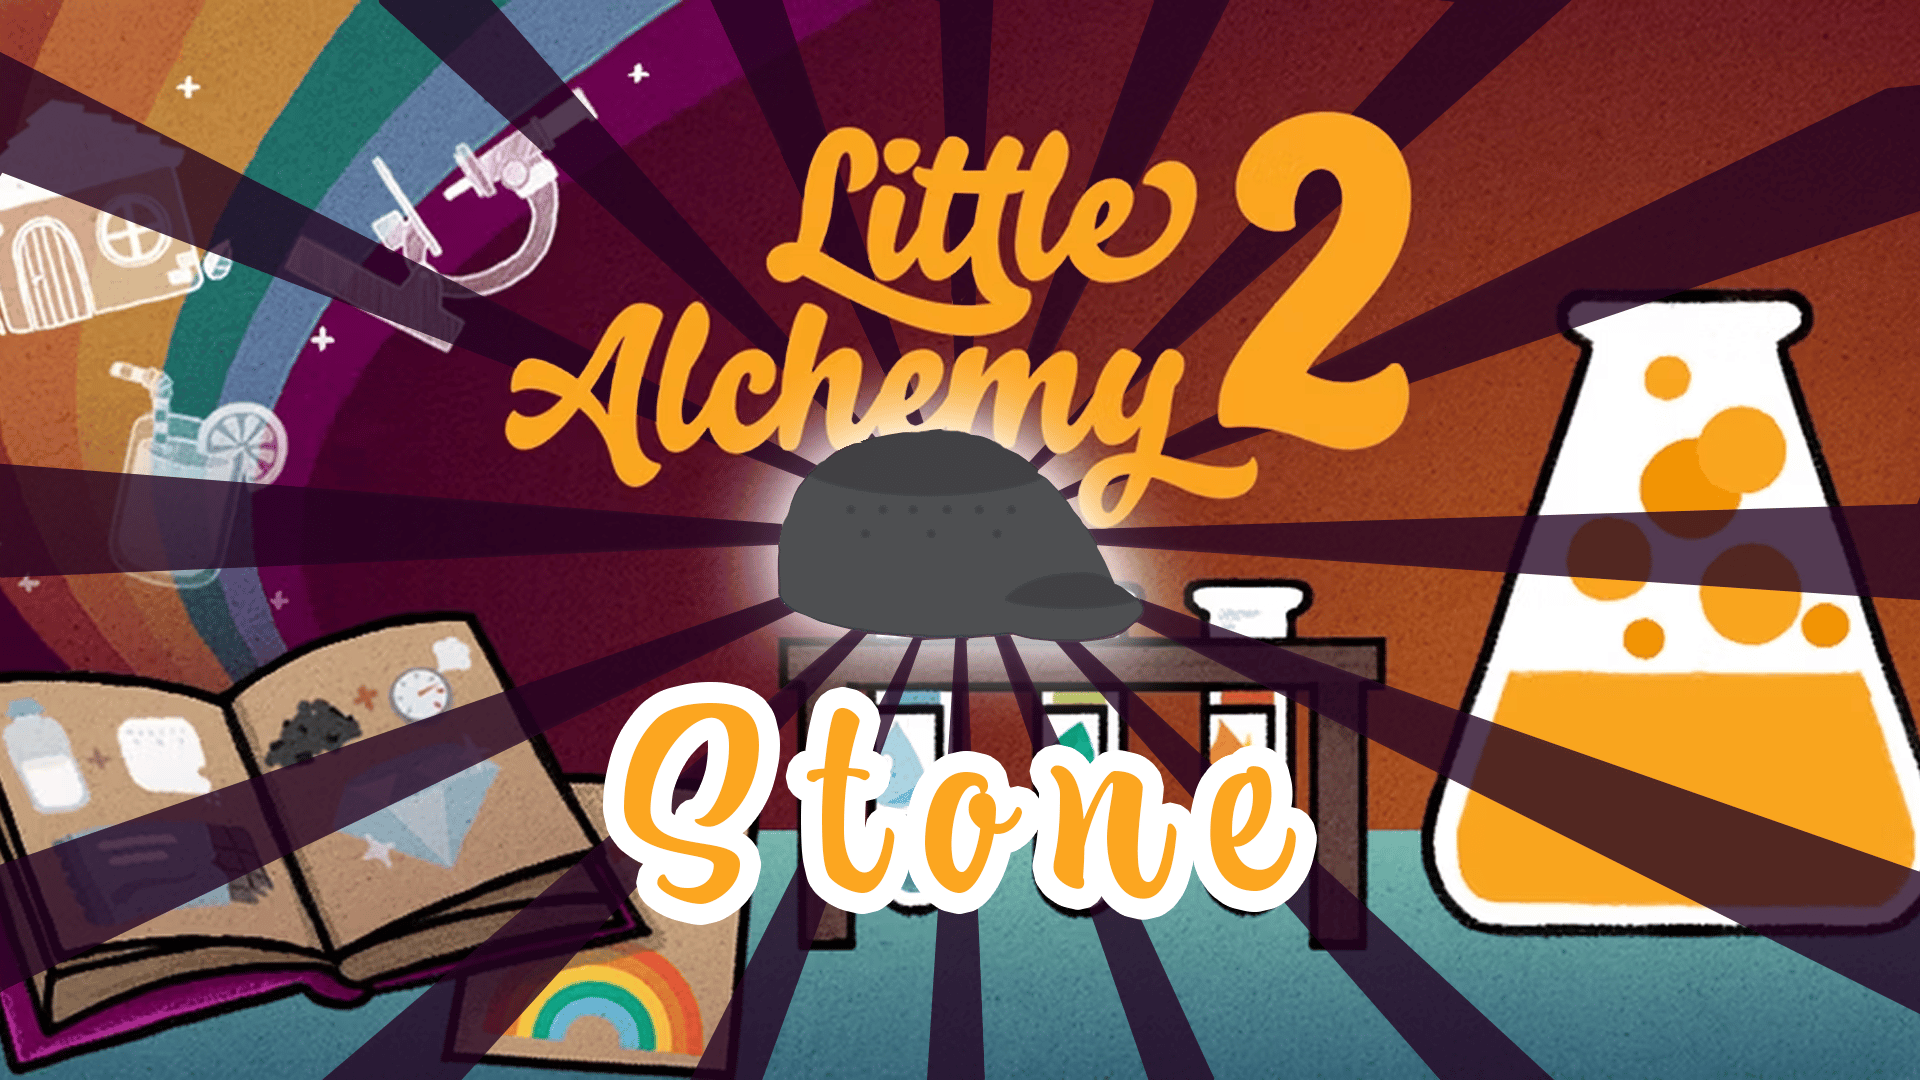 How to Make Stone in Little Alchemy 1?